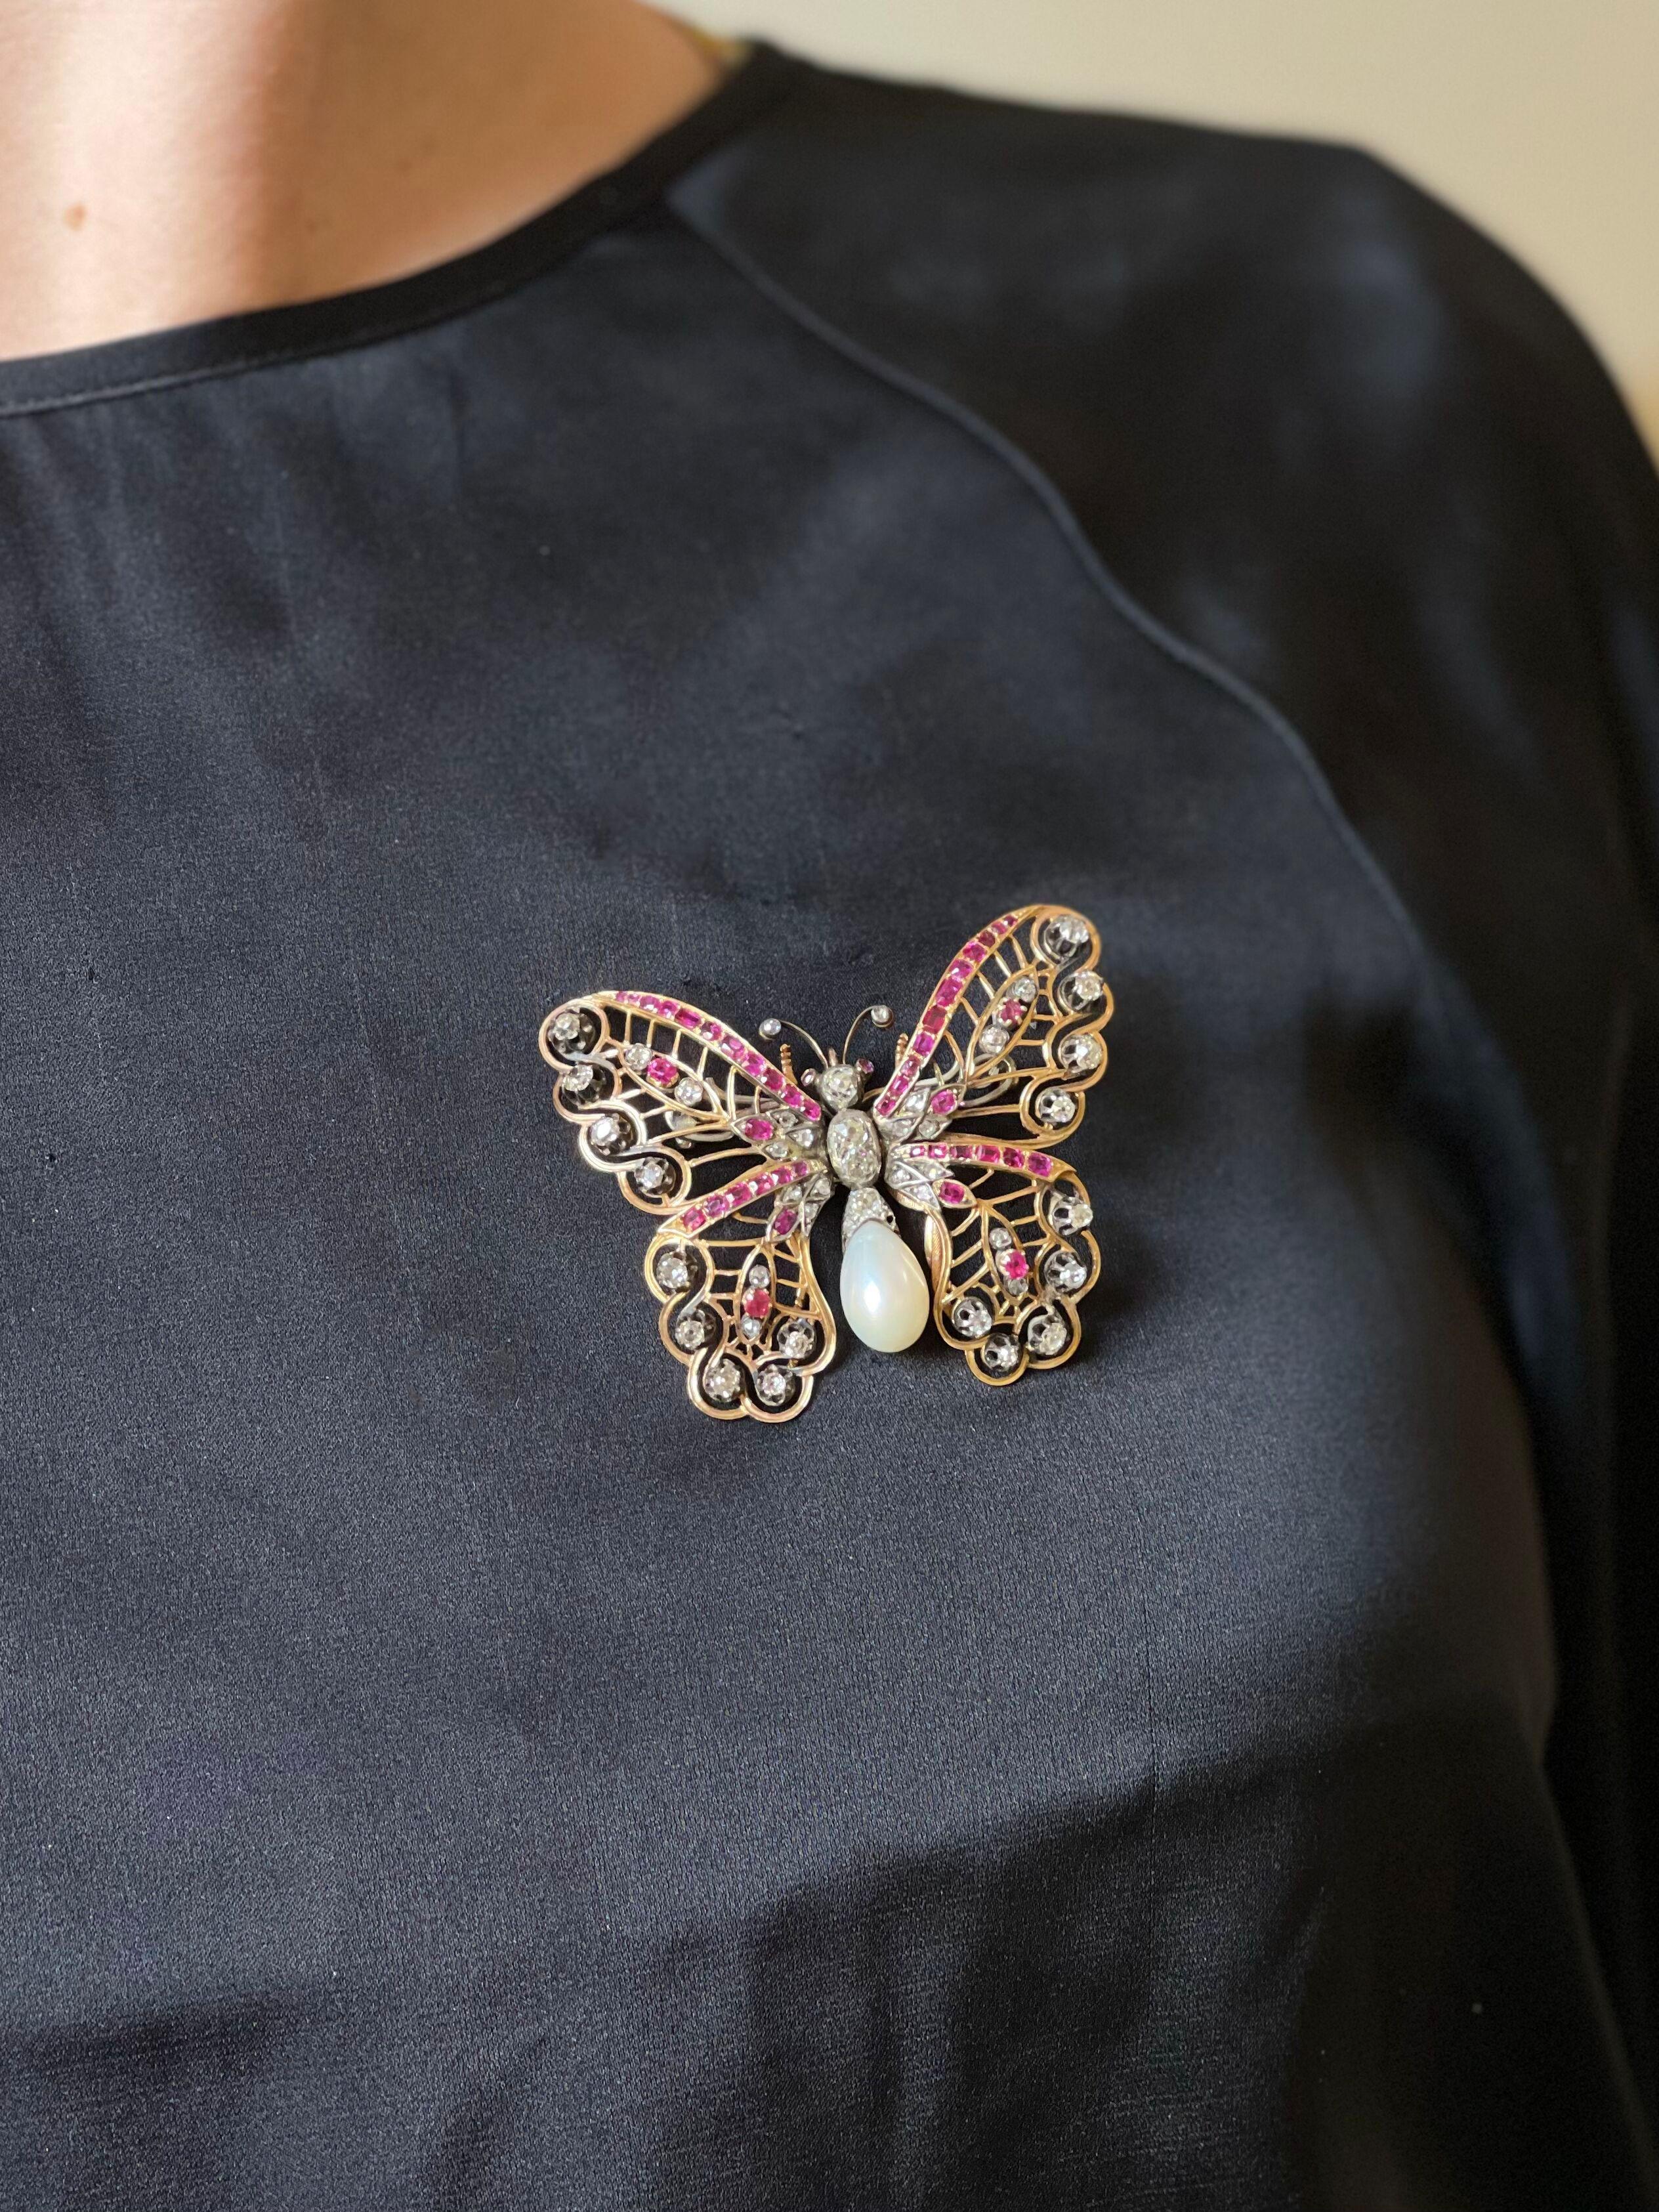 Antique 14k gold and silver butterfly brooch, set with rose and old mine diamonds - approx. 2.40ctw total, surrounded with rubies and a pearl. Brooch measures 2